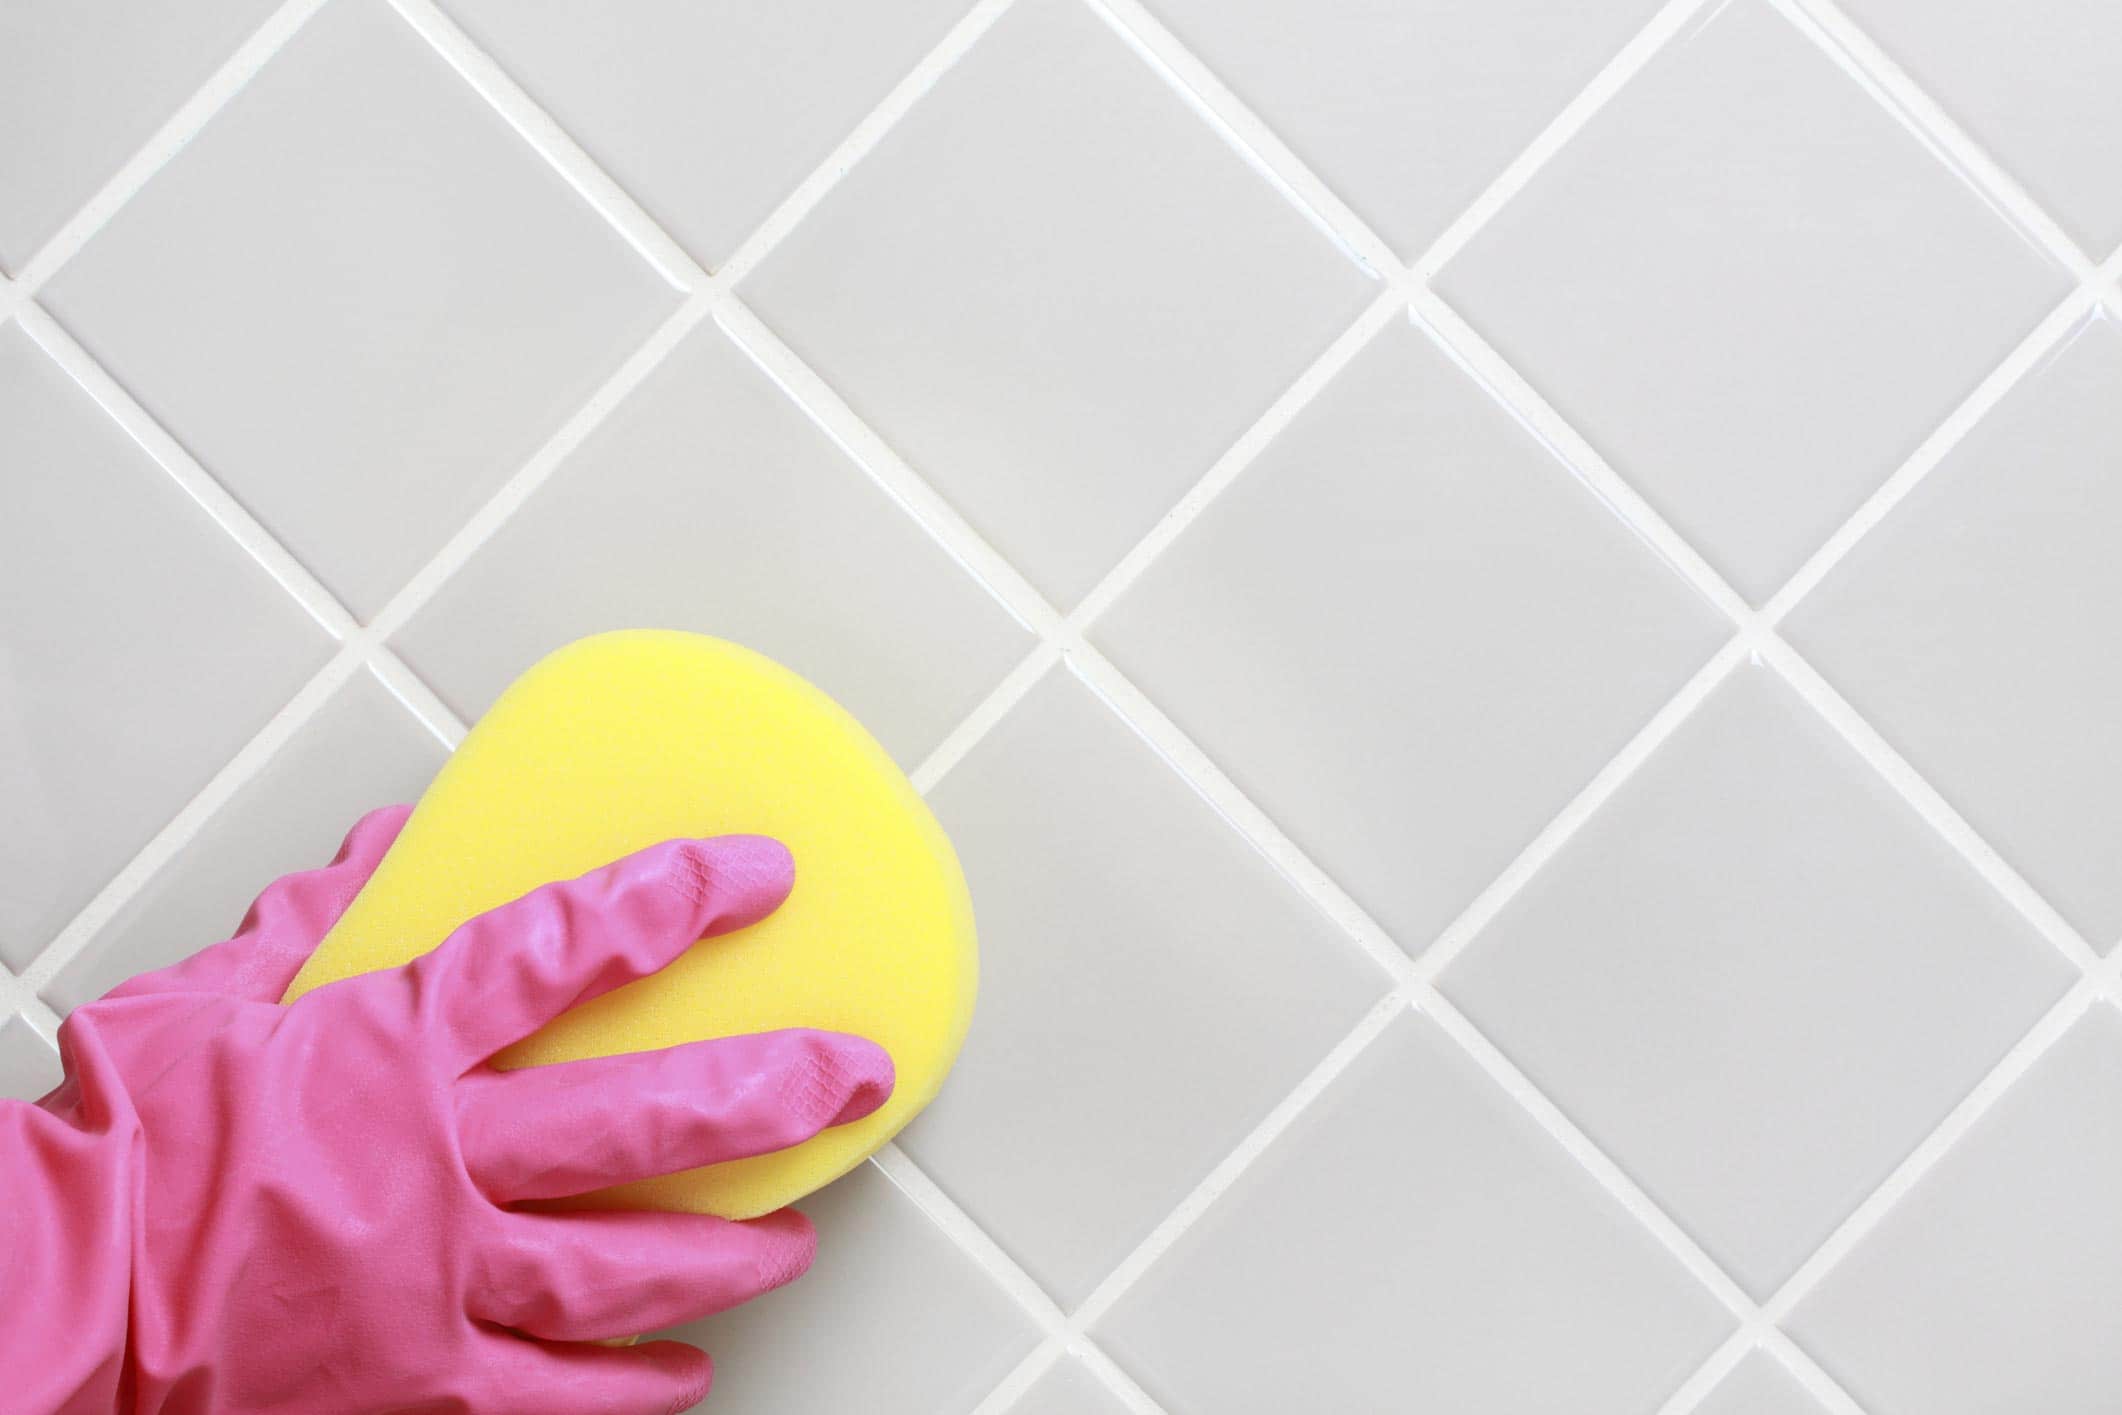 Wall tiles cleaner